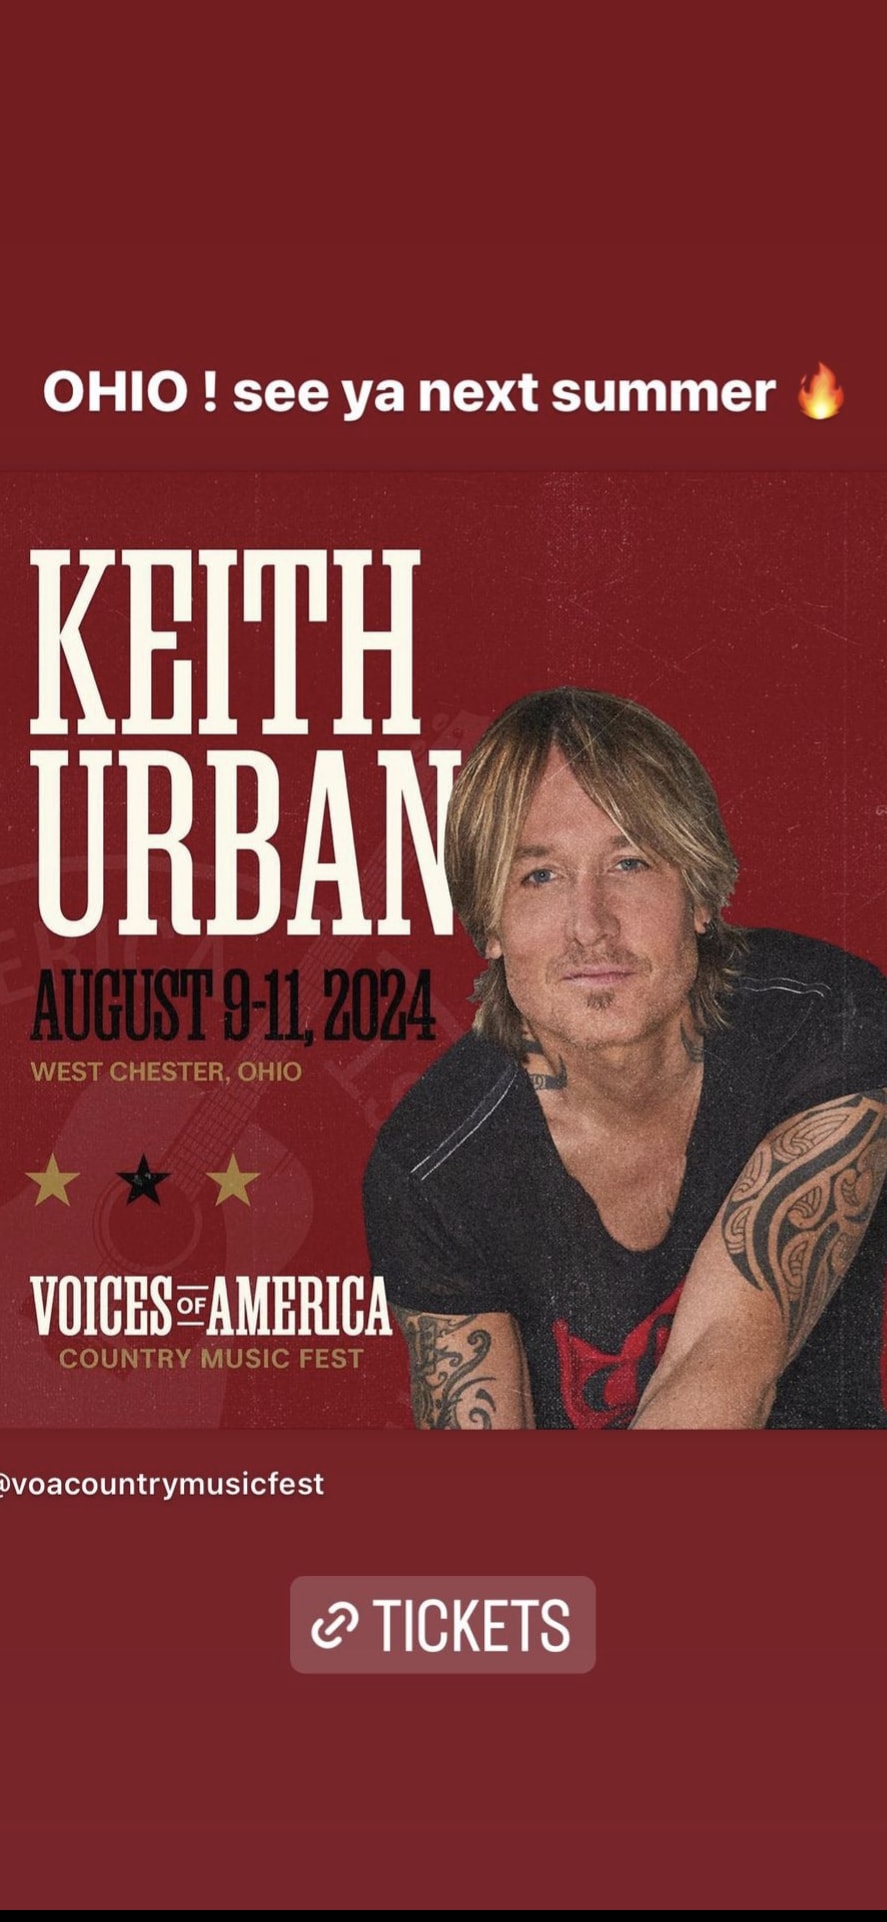 Keith Urban shared some exciting news with his fans